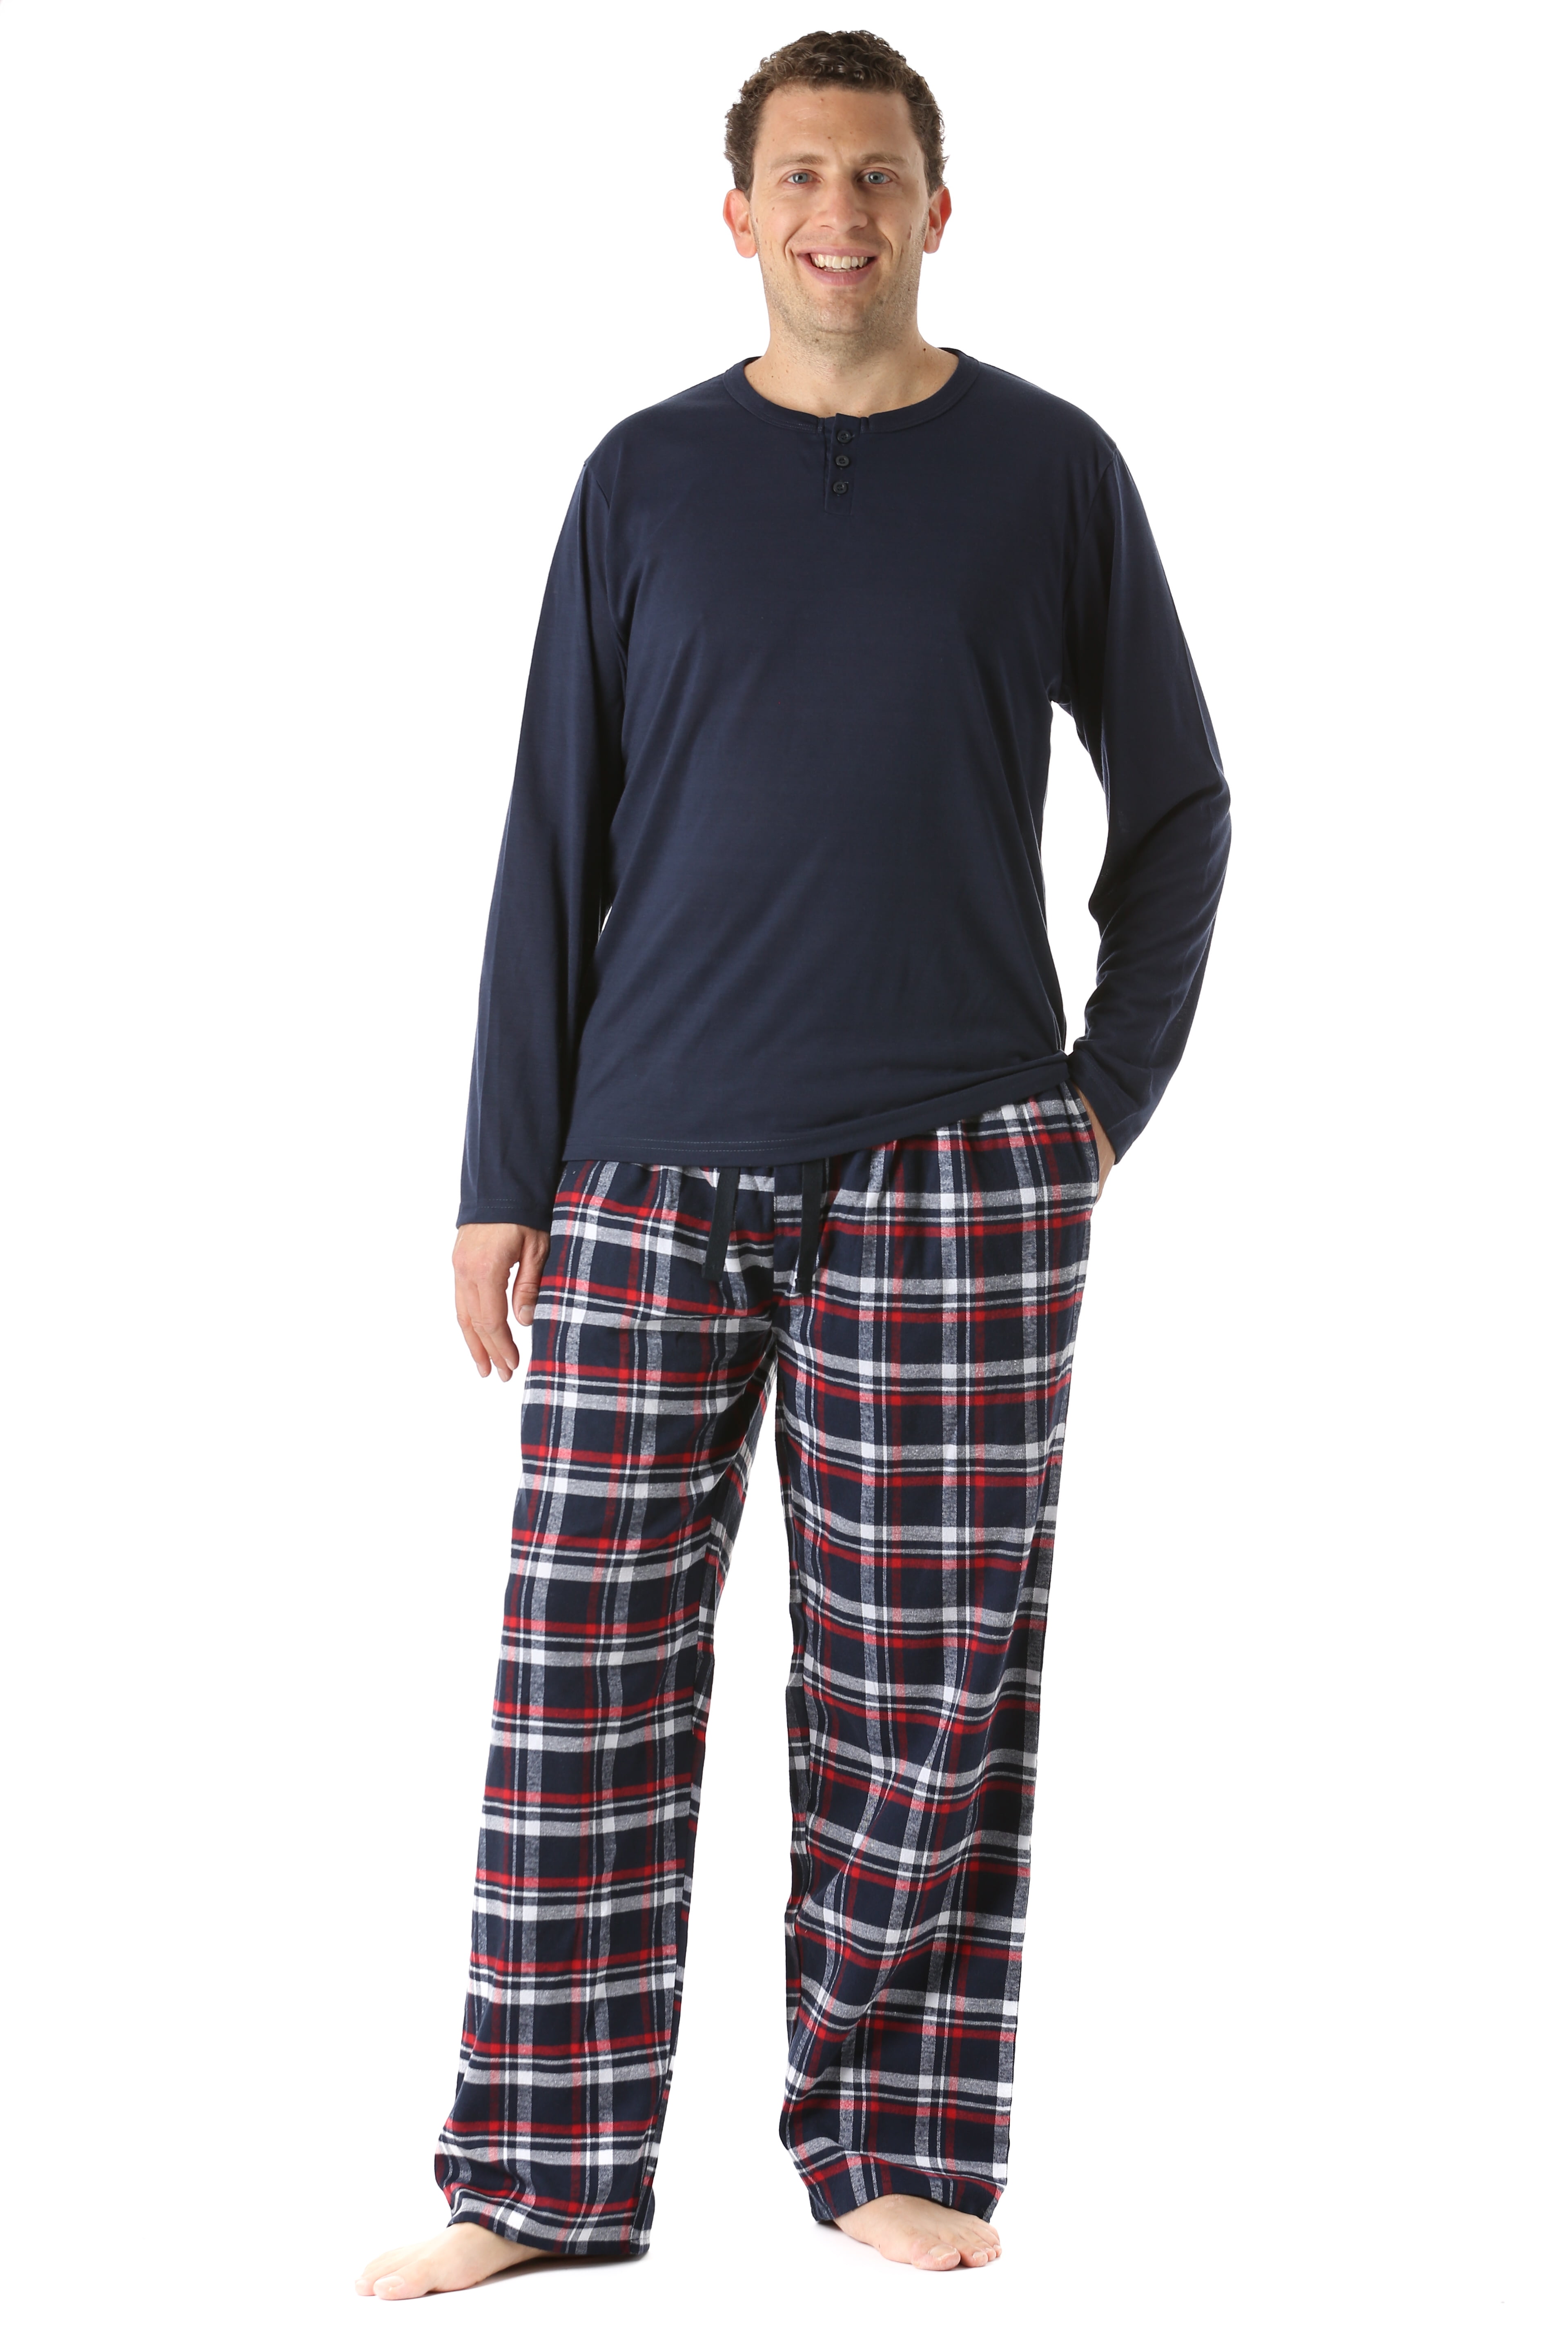 #followme Men's Flannel Pajama Pants with Jersey Top PJ Set (Navy, Red ...